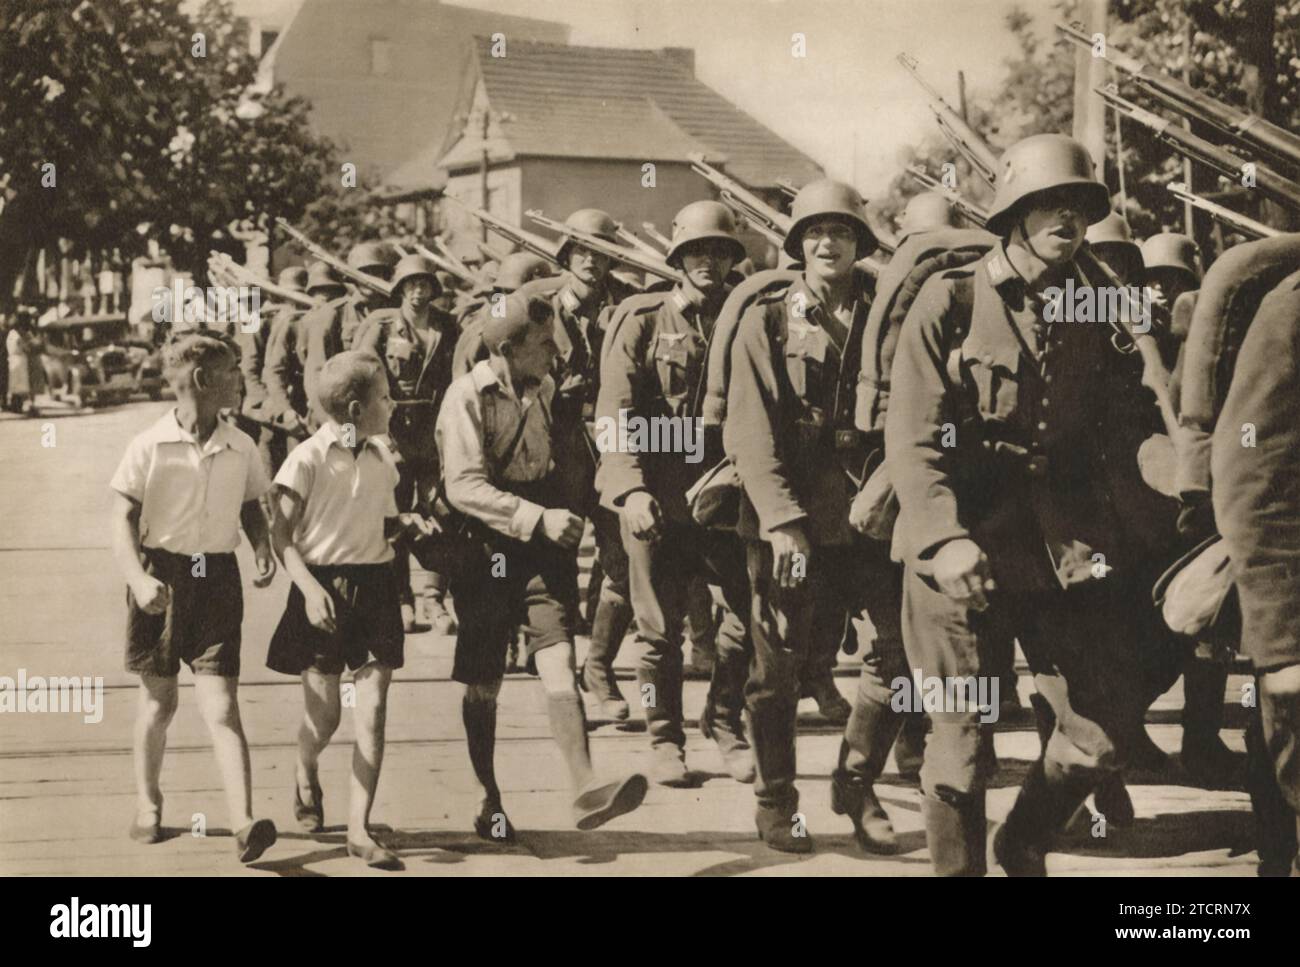 Children walk alongside the soldiers as they march into battle, a scene witnessed across various German regions. Their presence, with smiles and cheers, adds a poignant dimension to this moment of military unity, reflecting the widespread impact of the period on all ages. Stock Photo